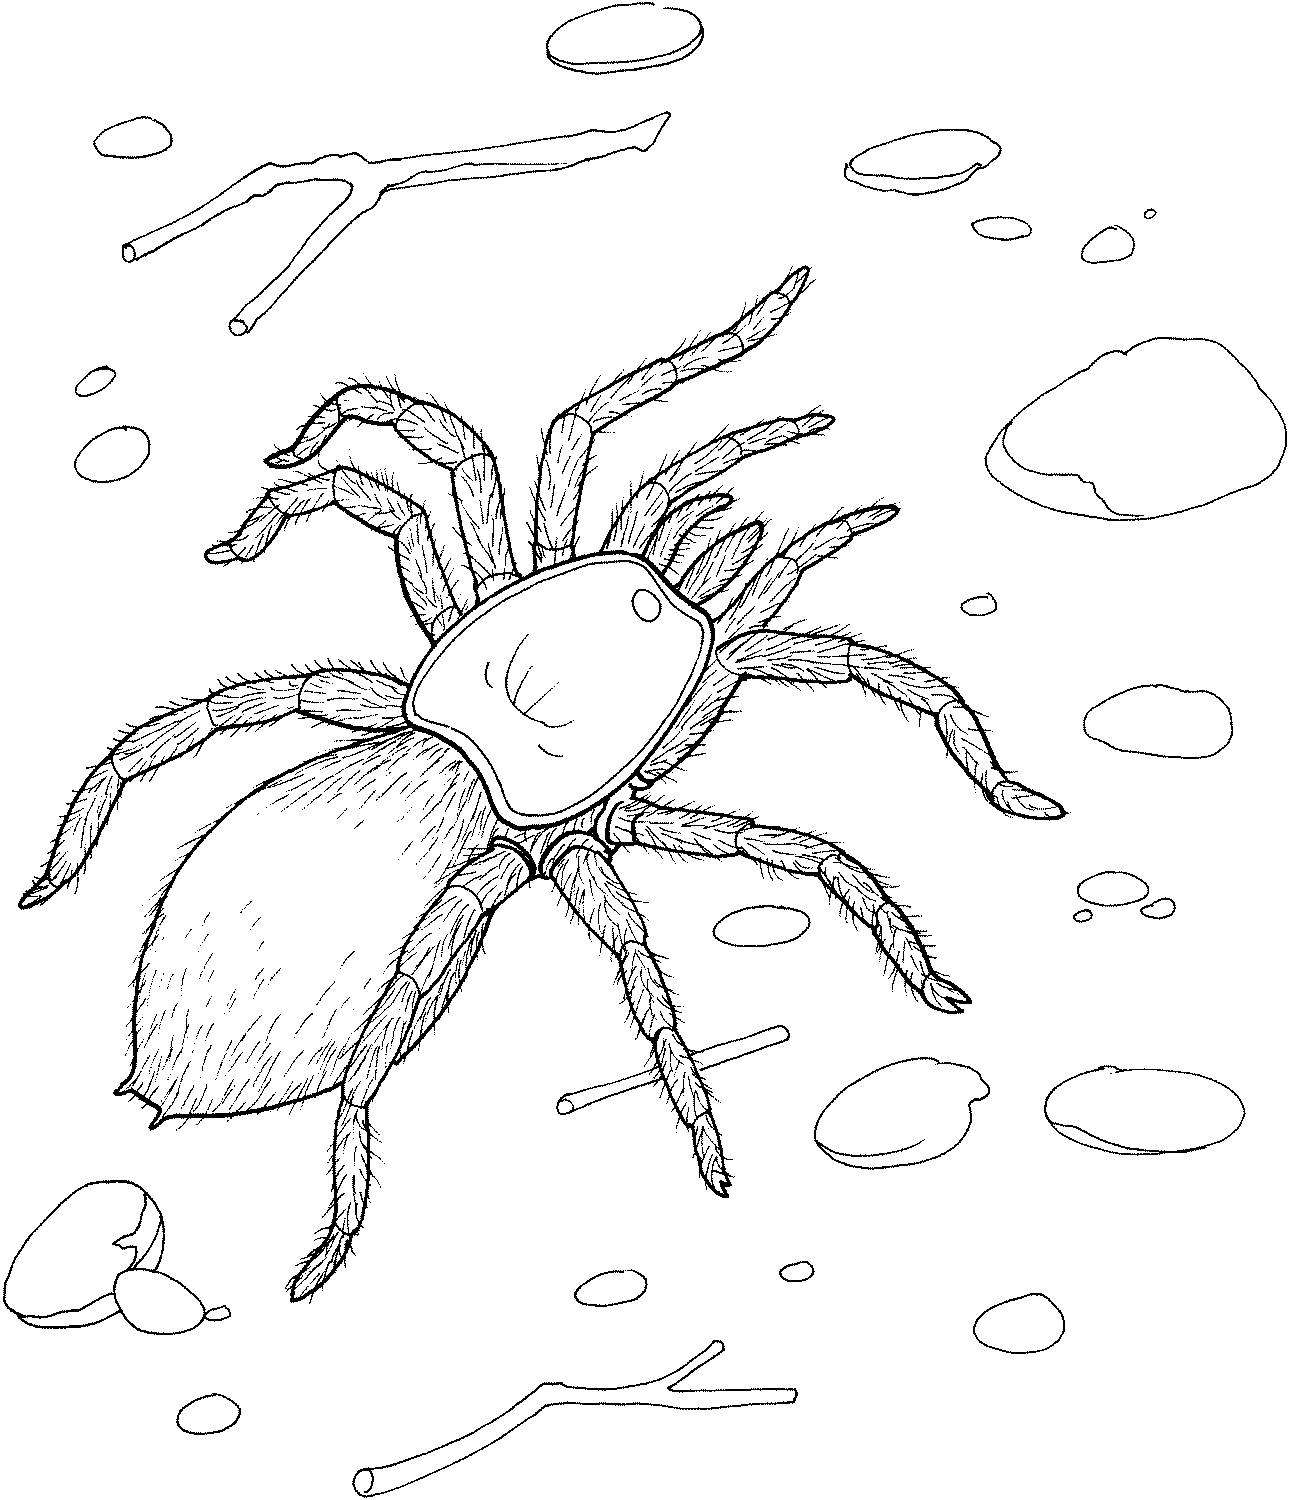 Reaslitic Spider Coloring Page